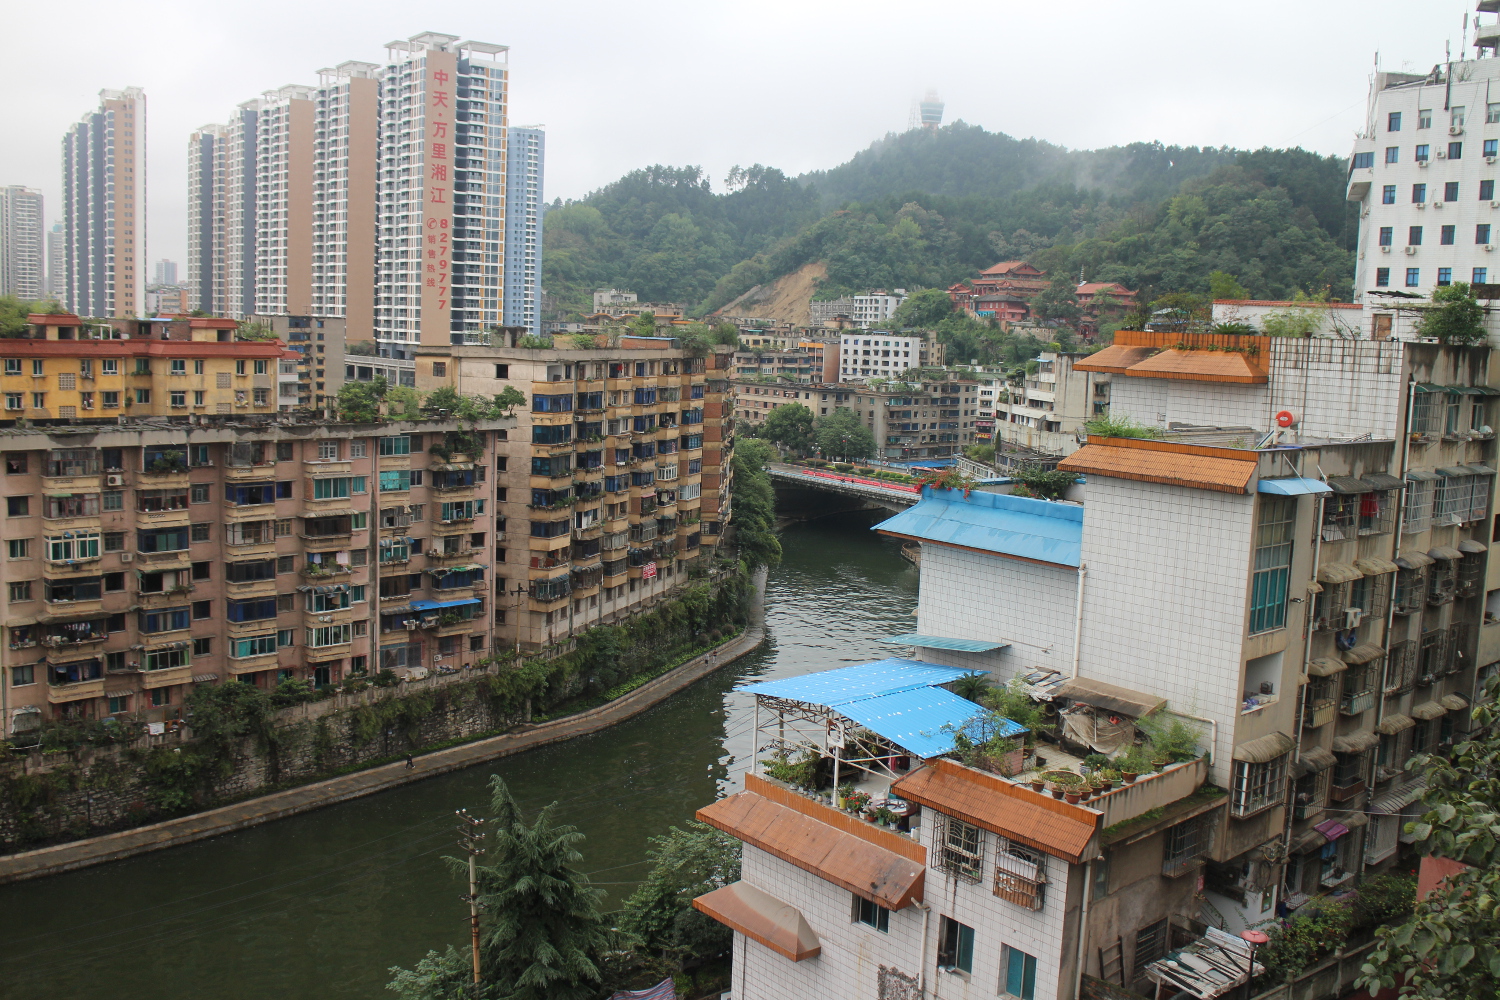 Views of old and new Zunyi from Xiangshan. Image by Thomas Bird / Lonely Planet